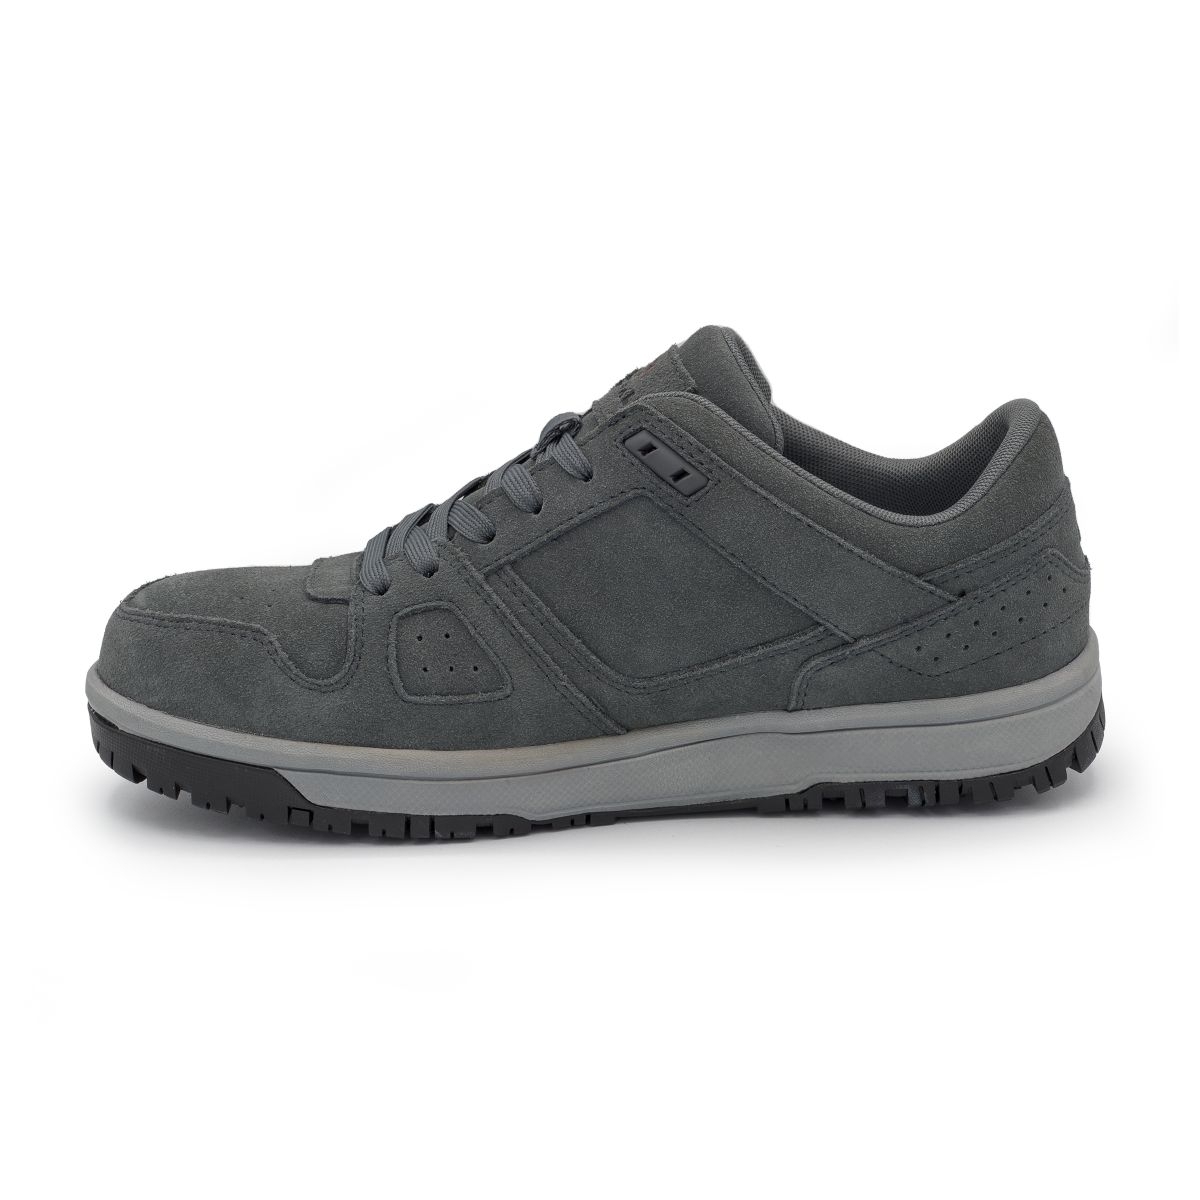 AIRWALK SAFETY Men's Mongo Composite Toe EH Work Shoe Charcoal/Grey - AW6301 CHARCOAL/GRAY - CHARCOAL/GRAY, 7.5-M